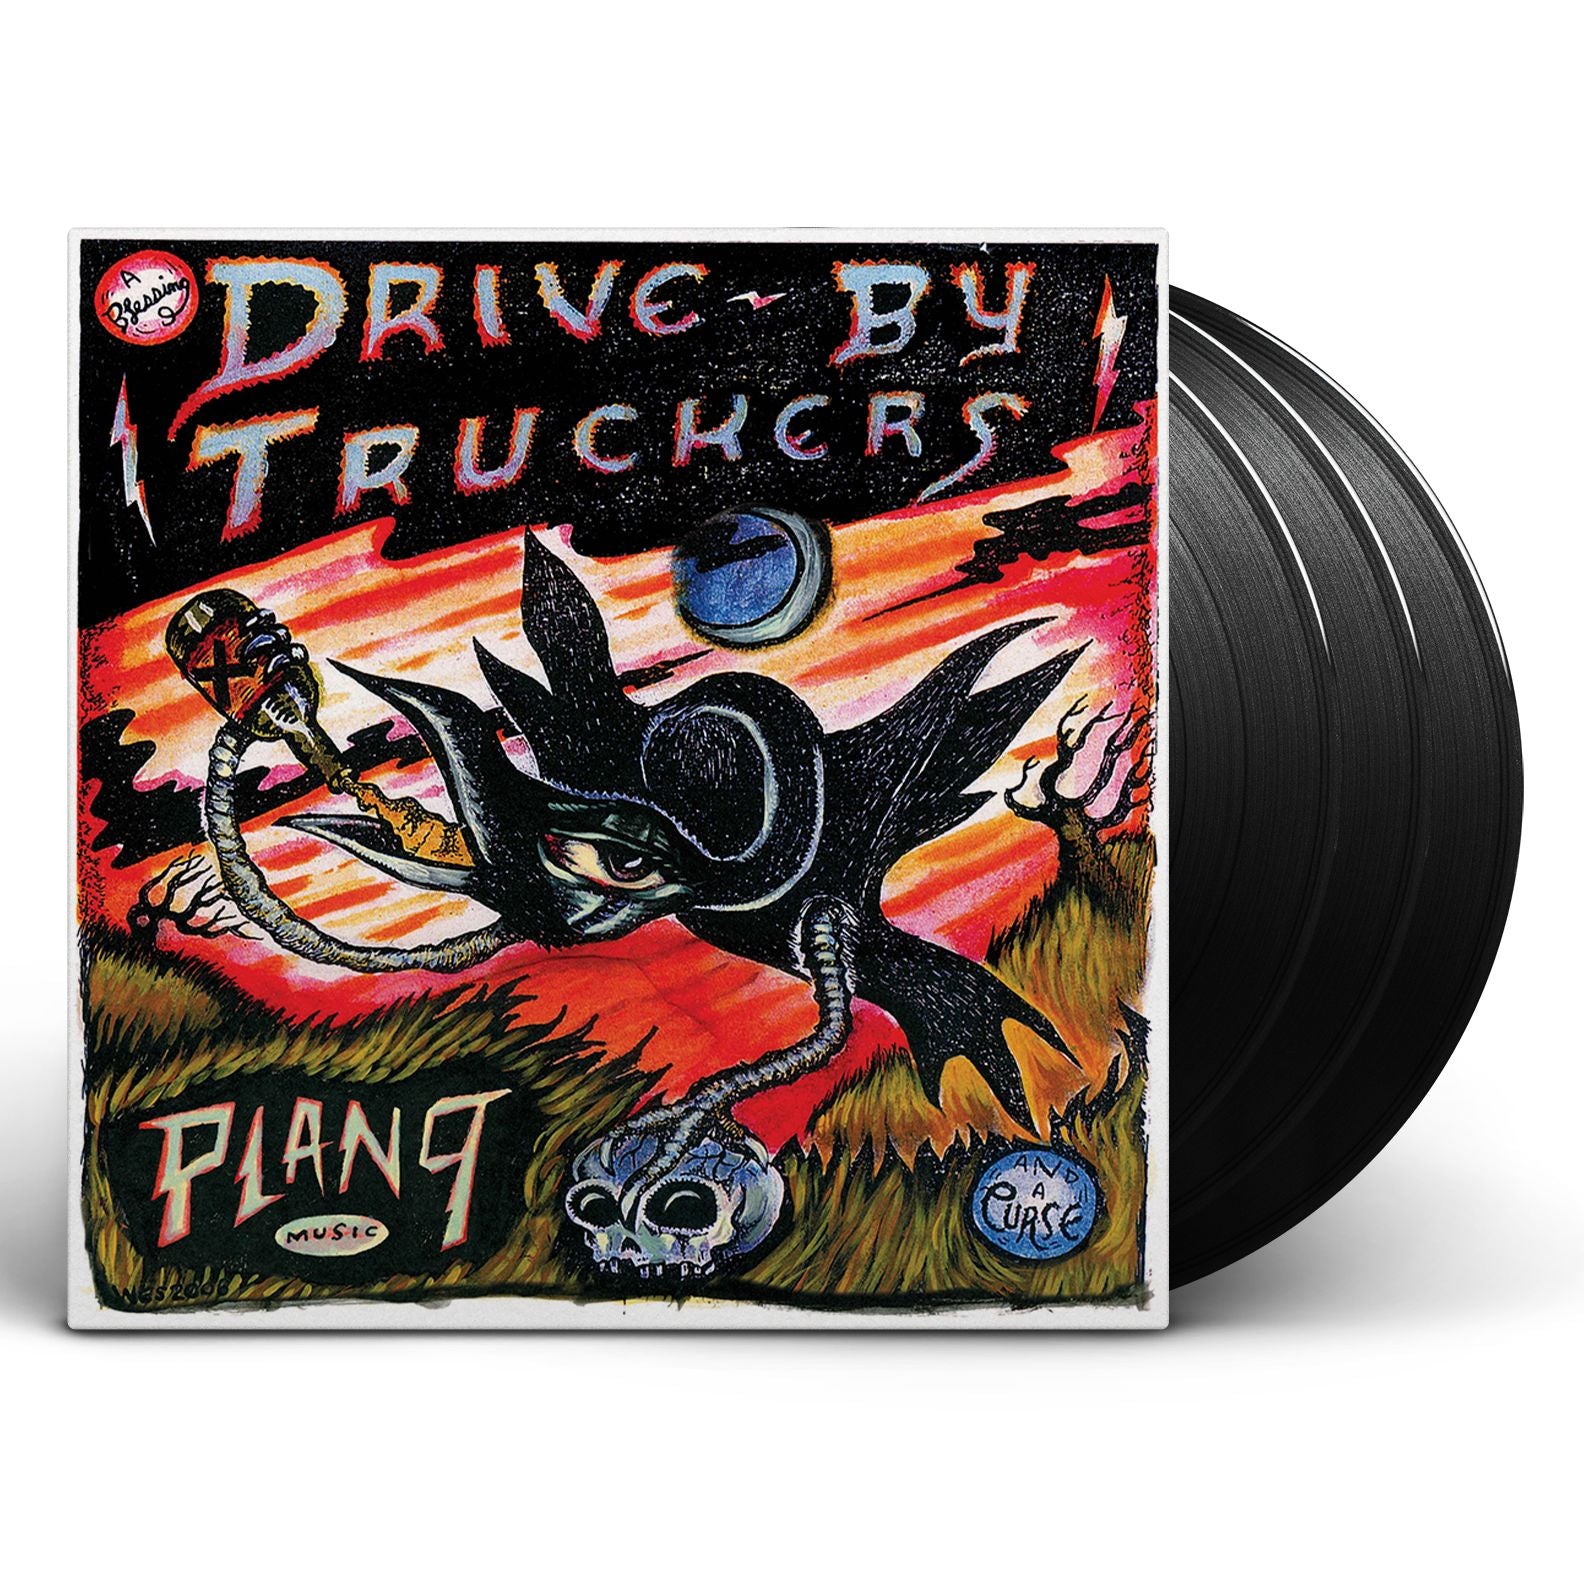 Drive-By Truckers - Live @ Plan 9 [Vinyl]